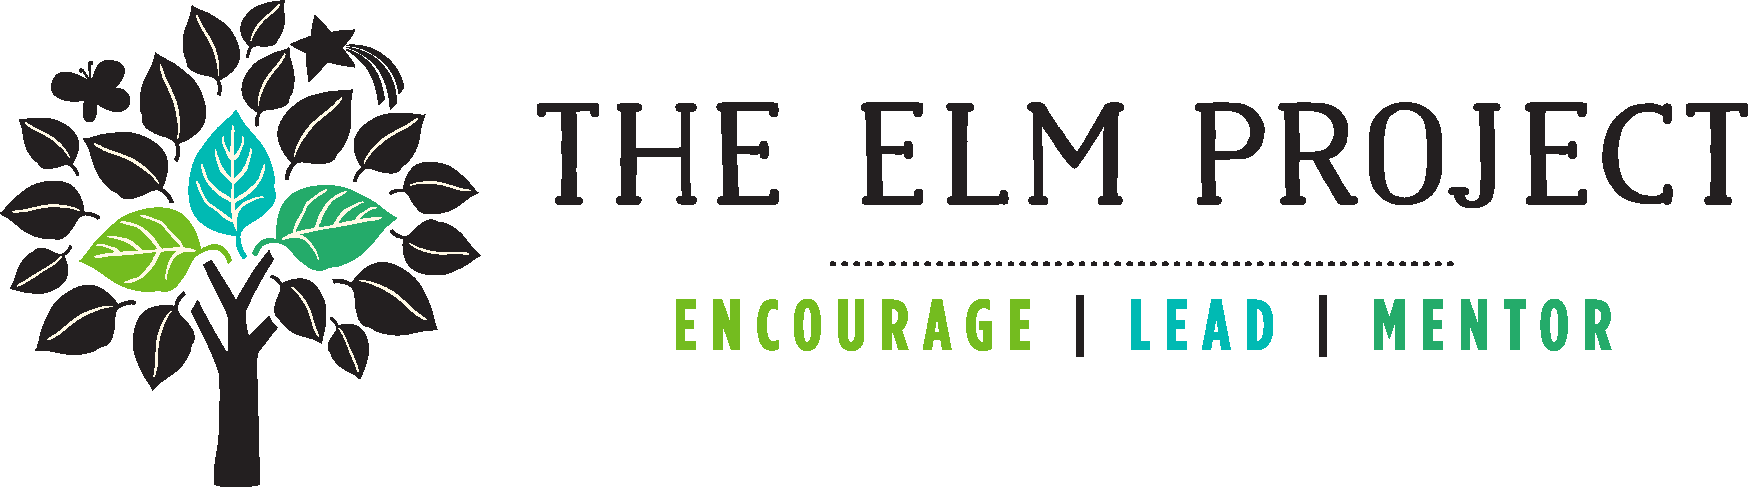 The ELM Project